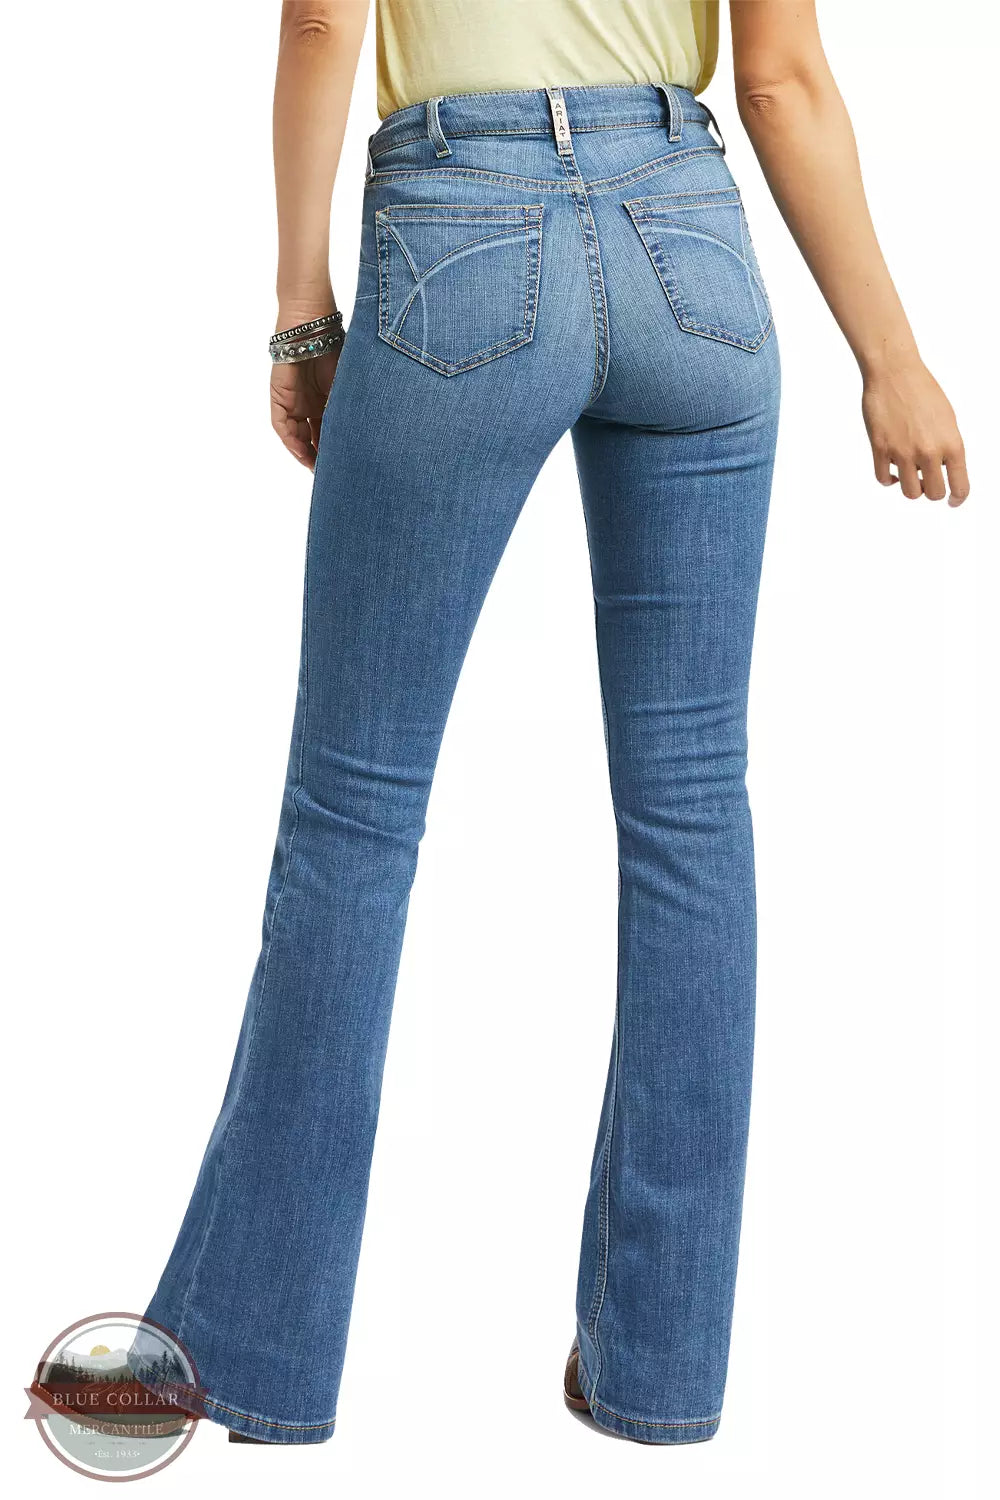 Ariat 10039602 REAL High Rise Daniela Boor Cut Jeans in Tennessee Back View